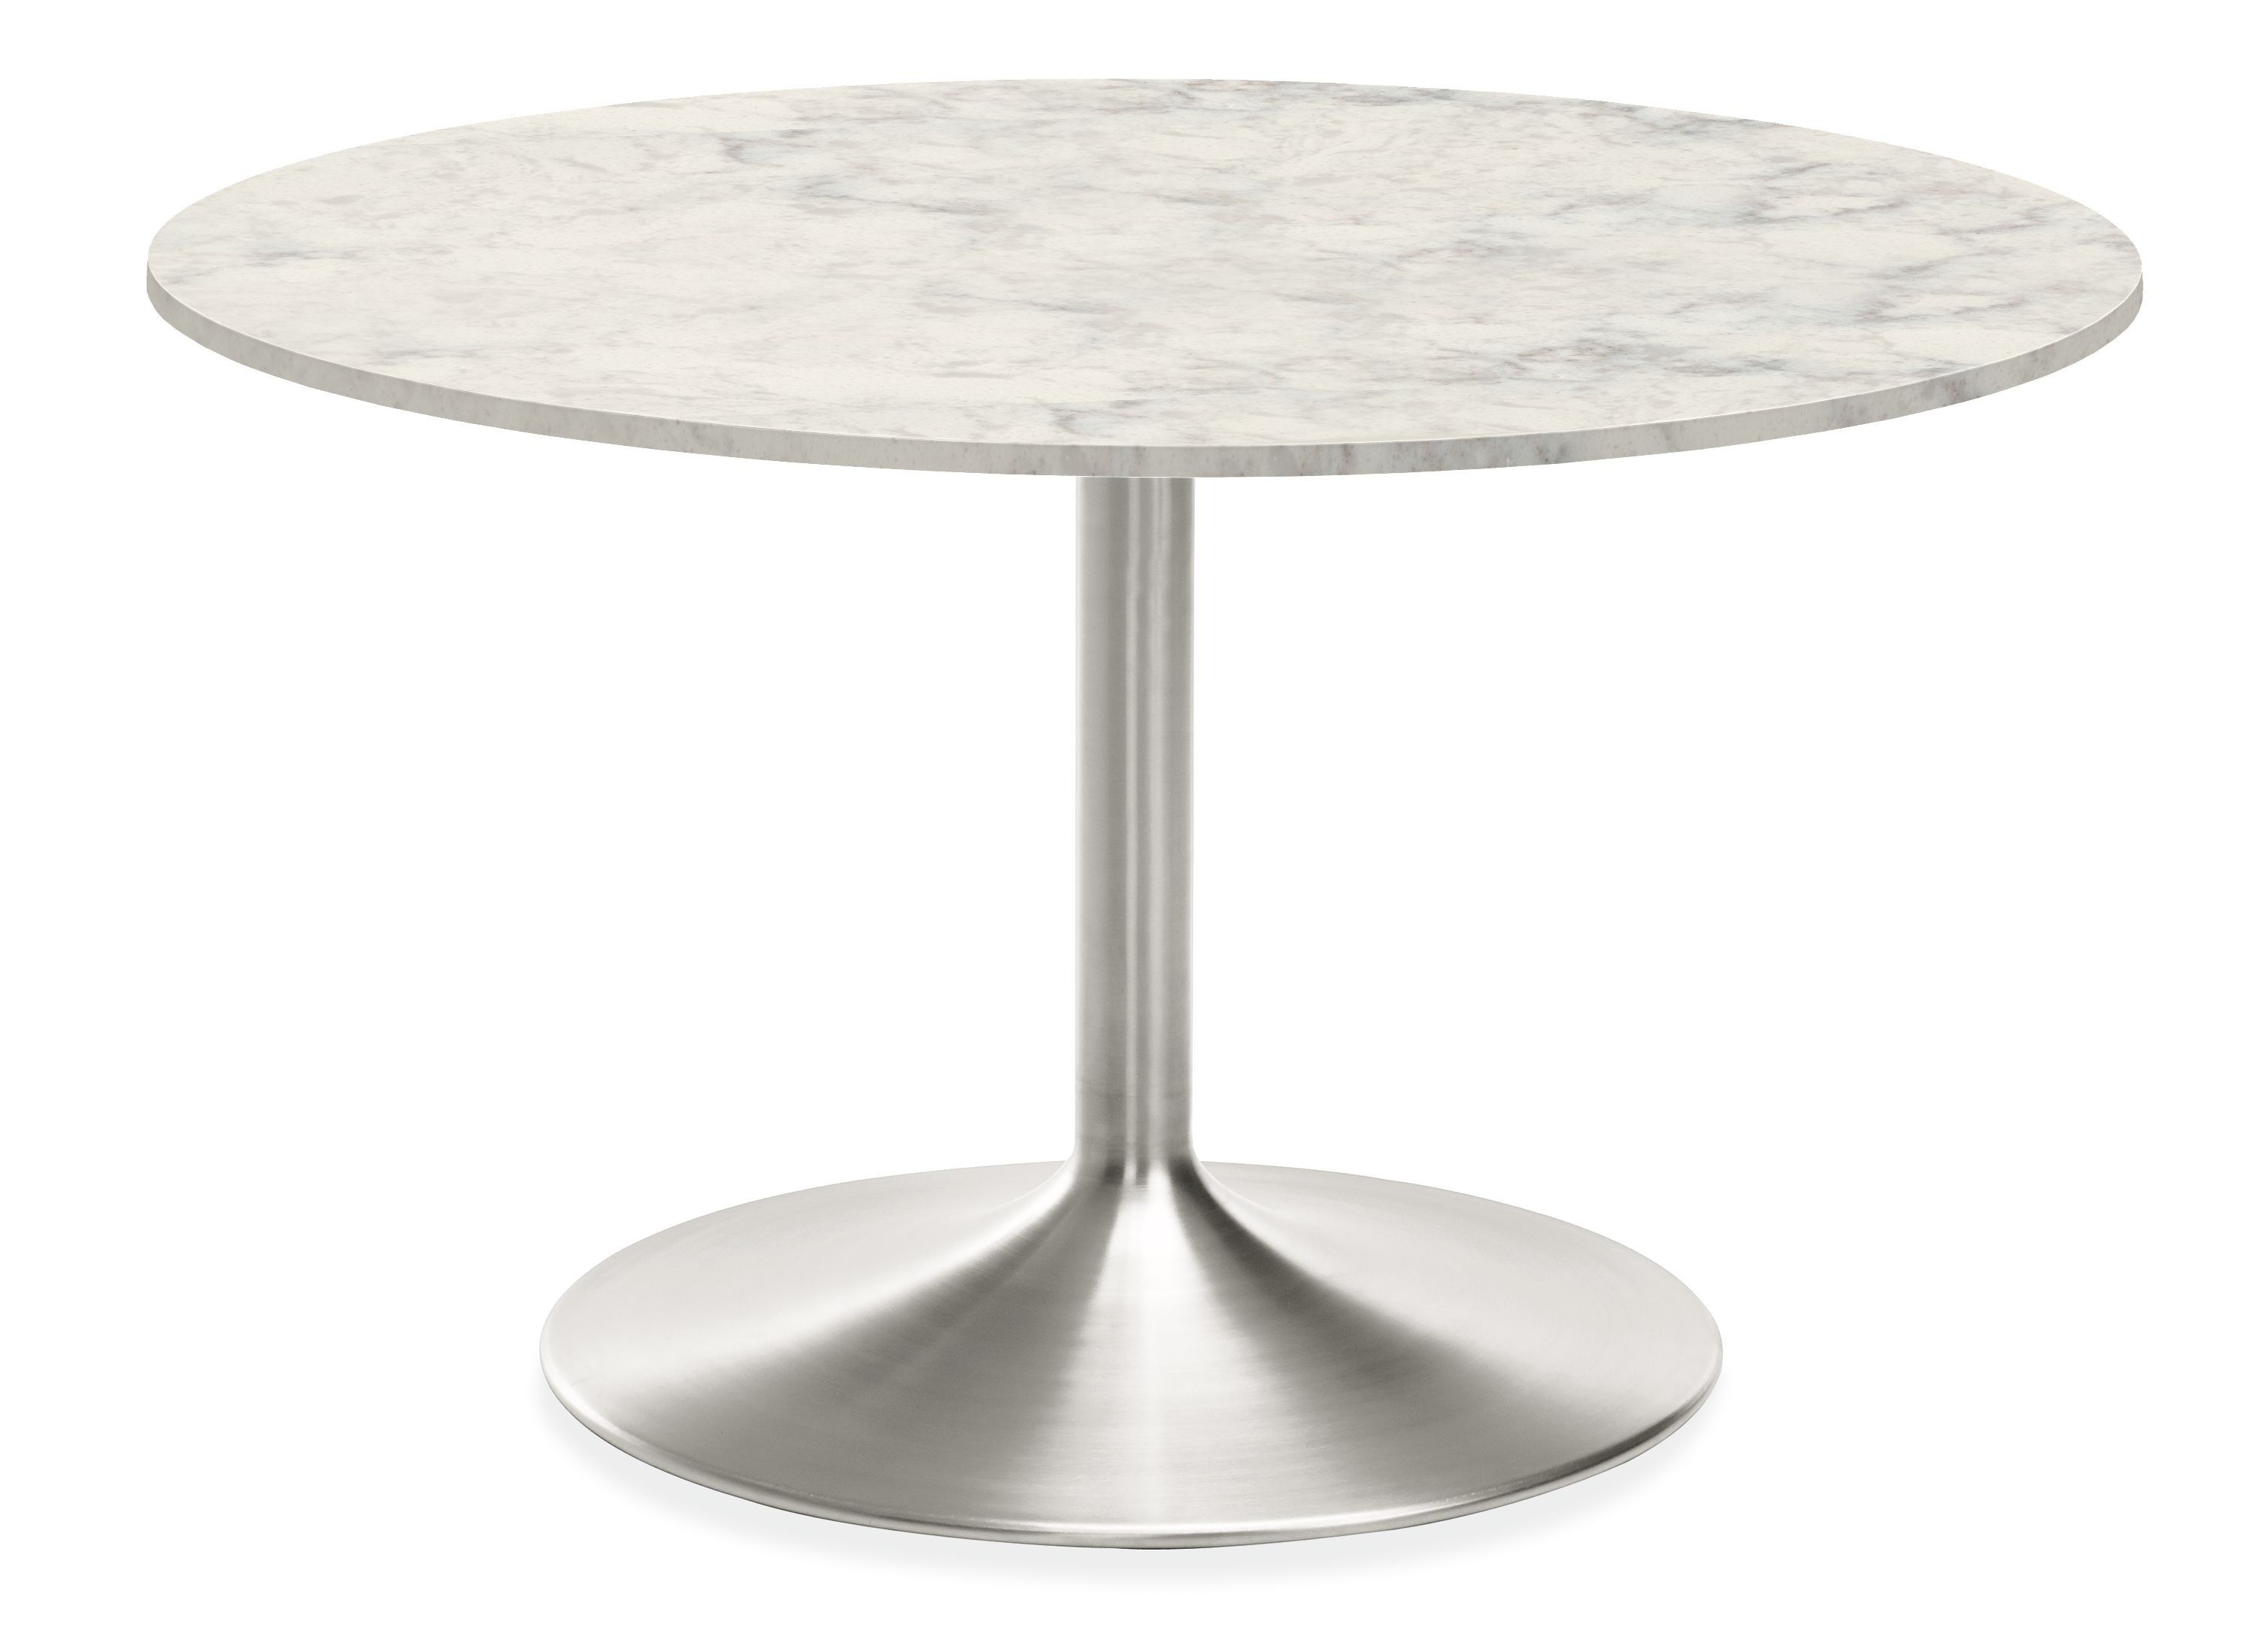 Aria Round Tables Modern Dining Room, What Is The Diameter Of A 42 Inch Round Table Fan